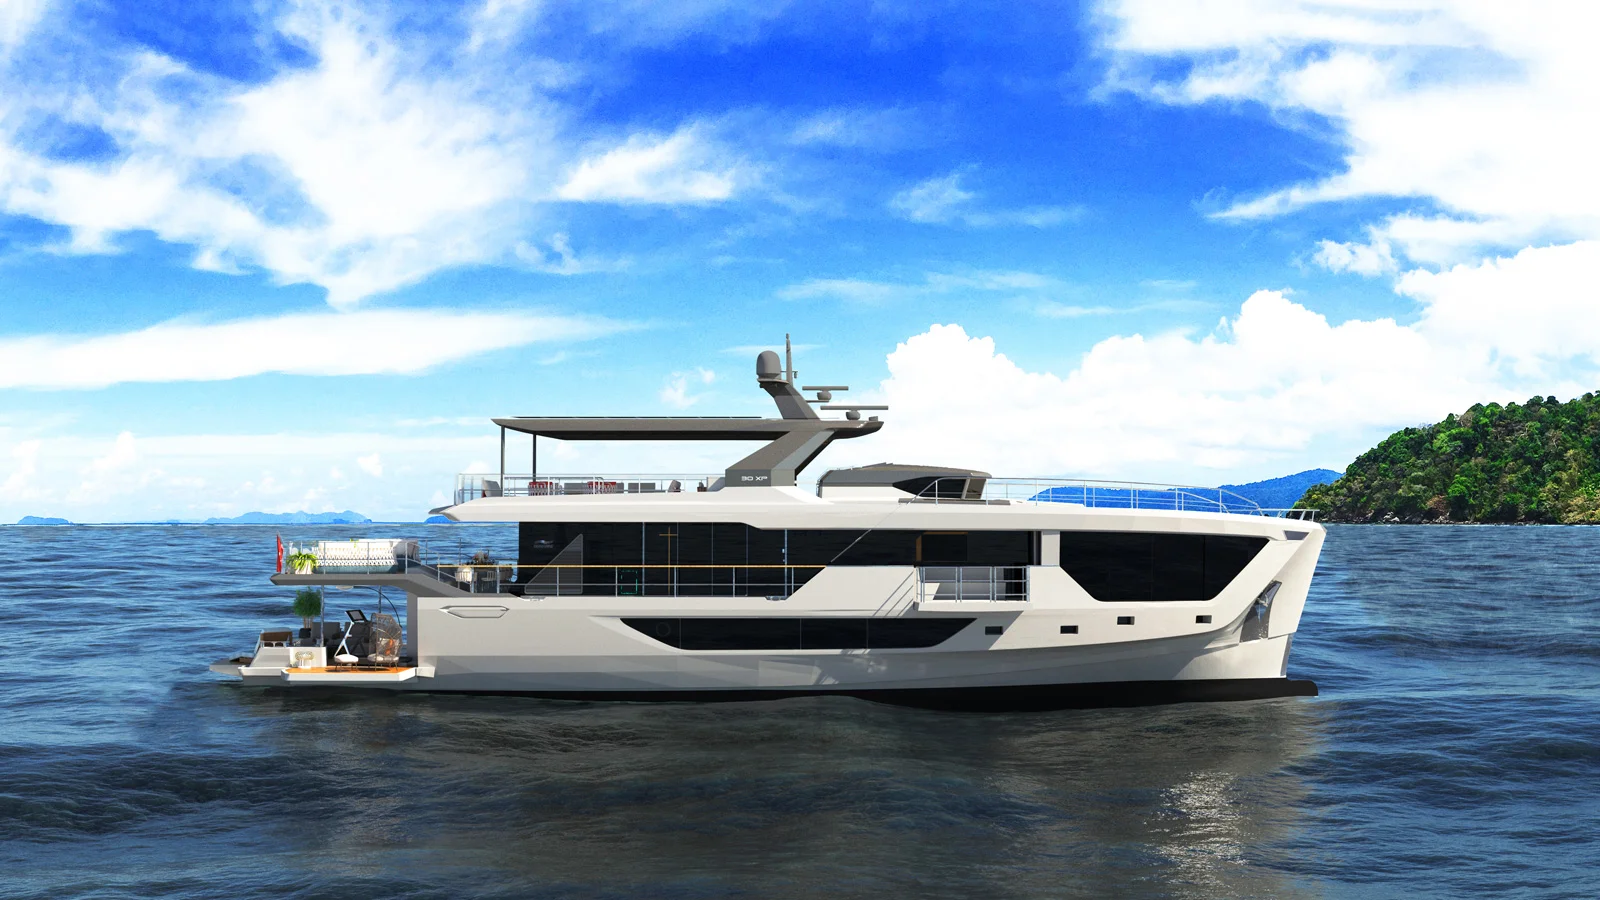 The Numarine 30XP yacht features interior and exterior design by Can Yalman